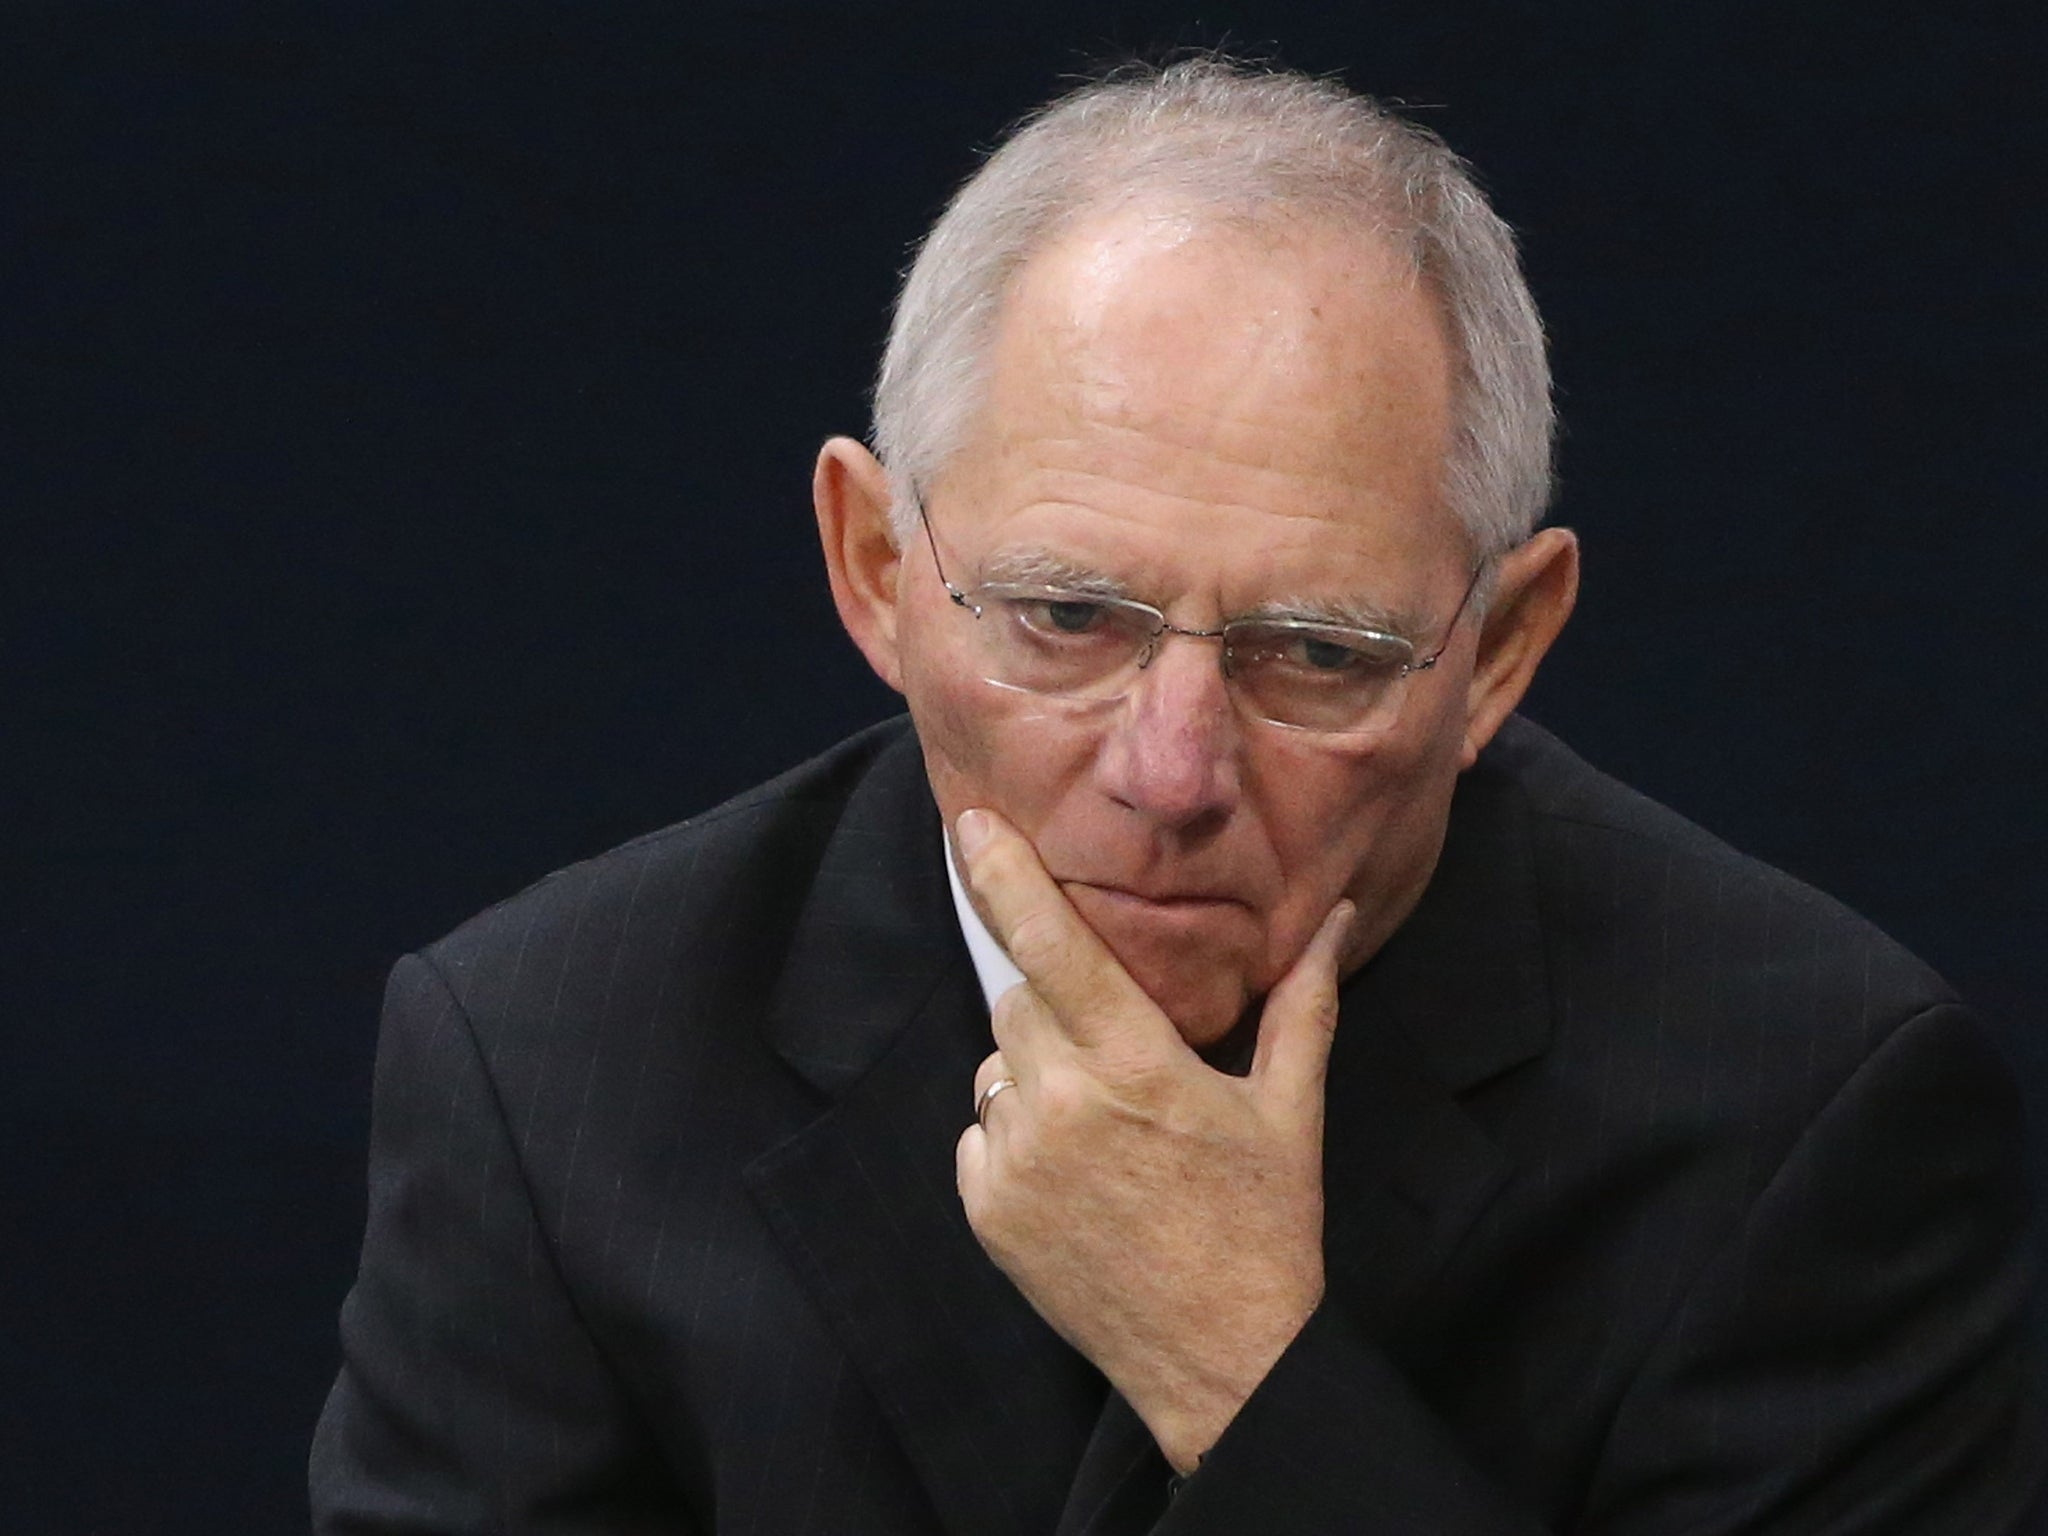 Wolfgang Schäuble says Britain must make a ‘wise political decision’ when it comes to negotiating Brexit